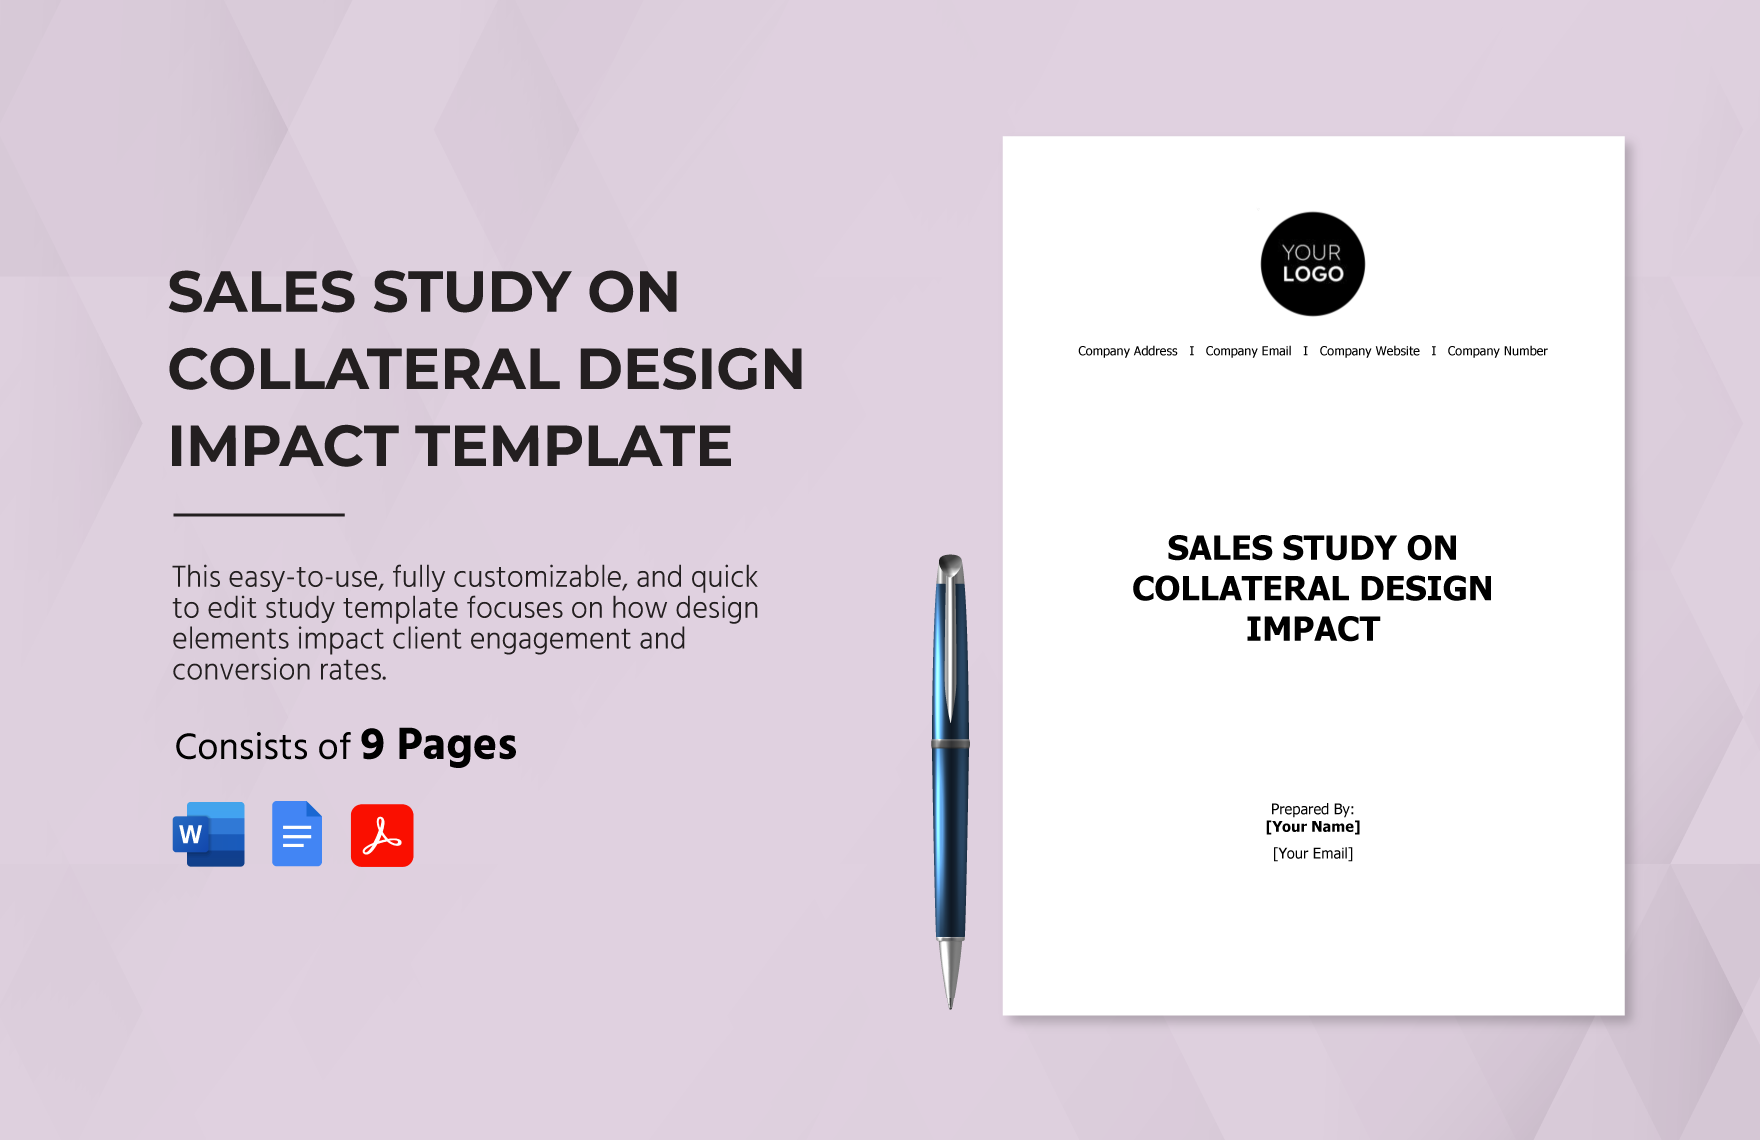 Sales Study on Collateral Design Impact Template